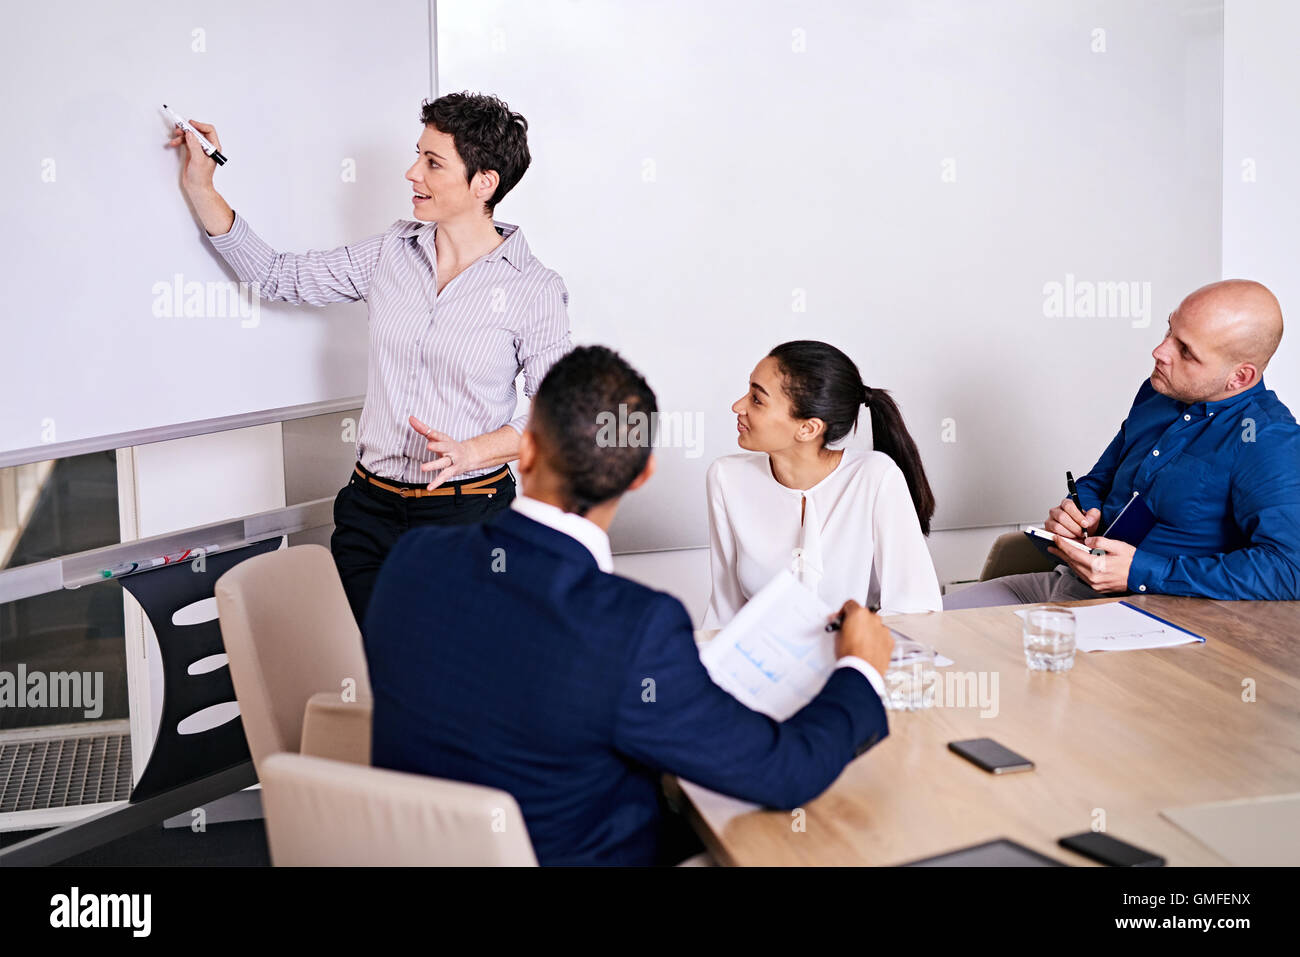 Mature businesswoman making an enthusiastic presentation to potential investors Stock Photo